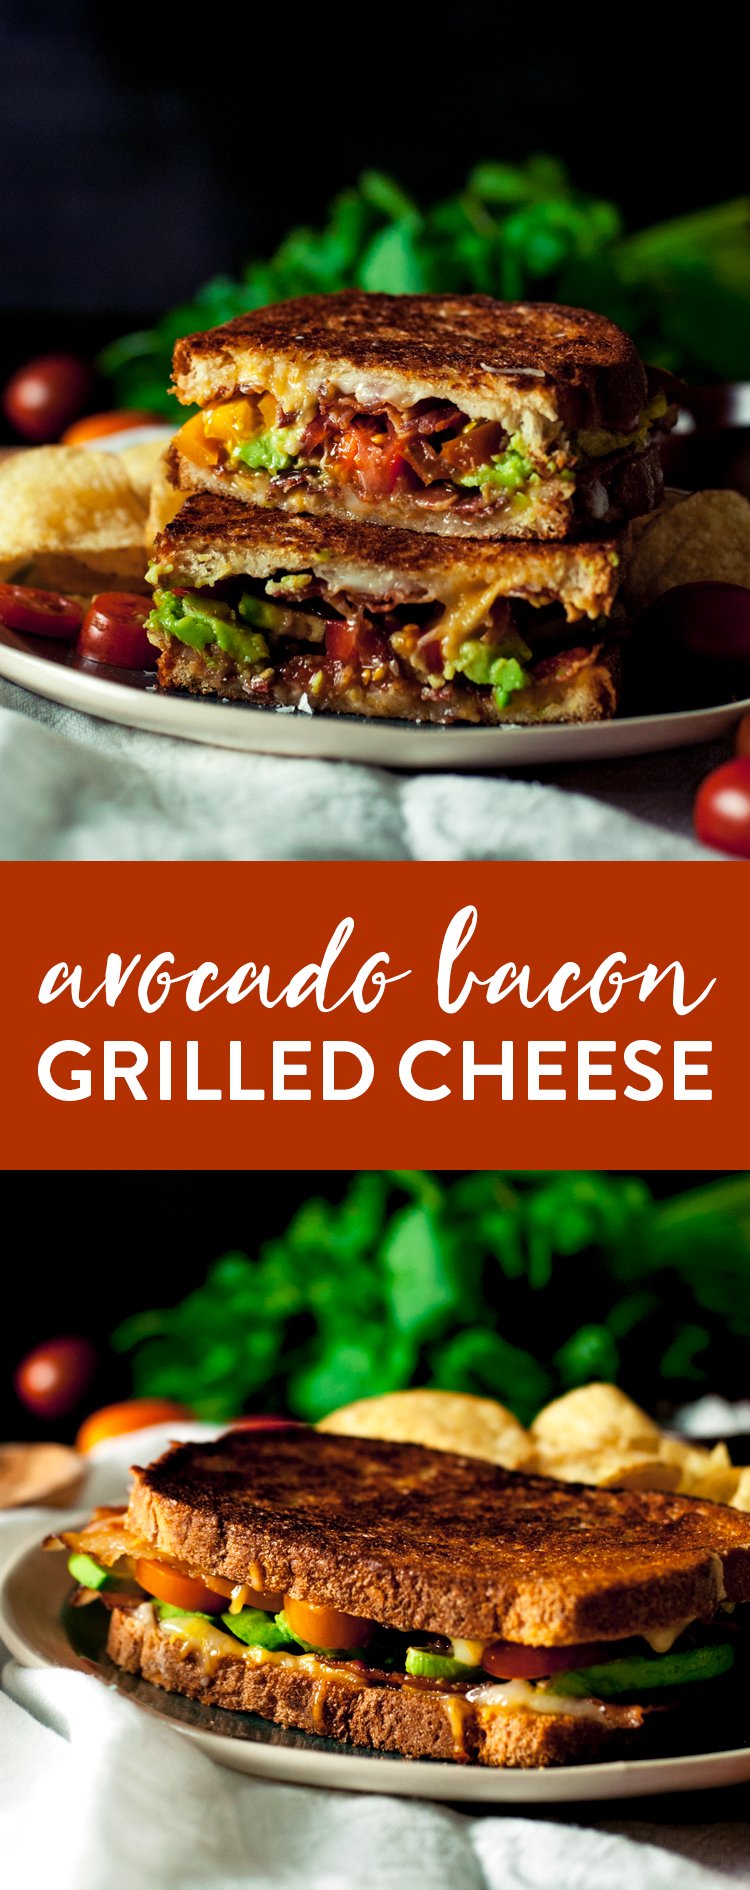 Get your bacon noms on with this super simple and super delicious Avocado Bacon Grilled Cheese sandwich! Ready to eat in under 15! | asimplepantry.com